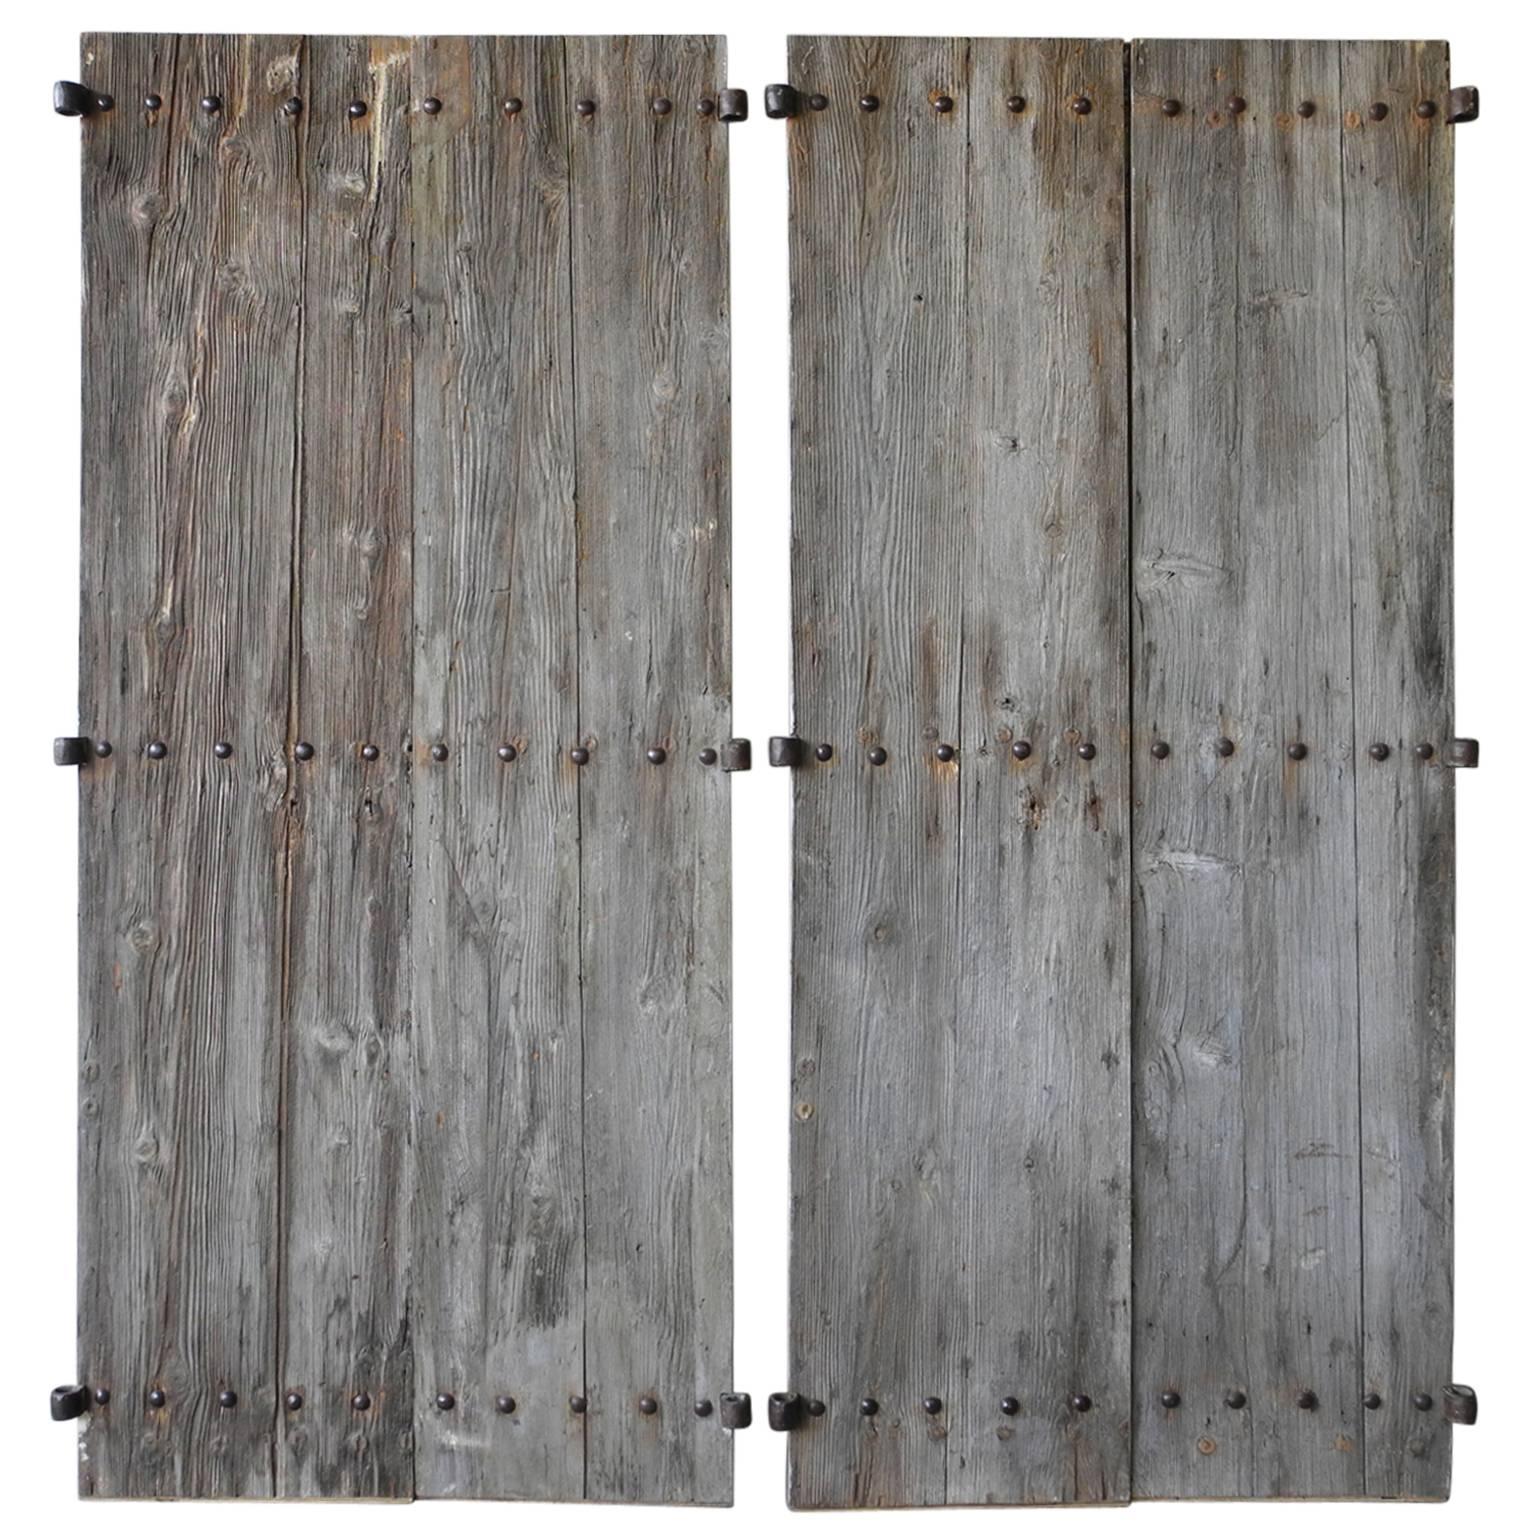 Two pairs of antique 18th century shutters from a chateau in Beaucaire, France.